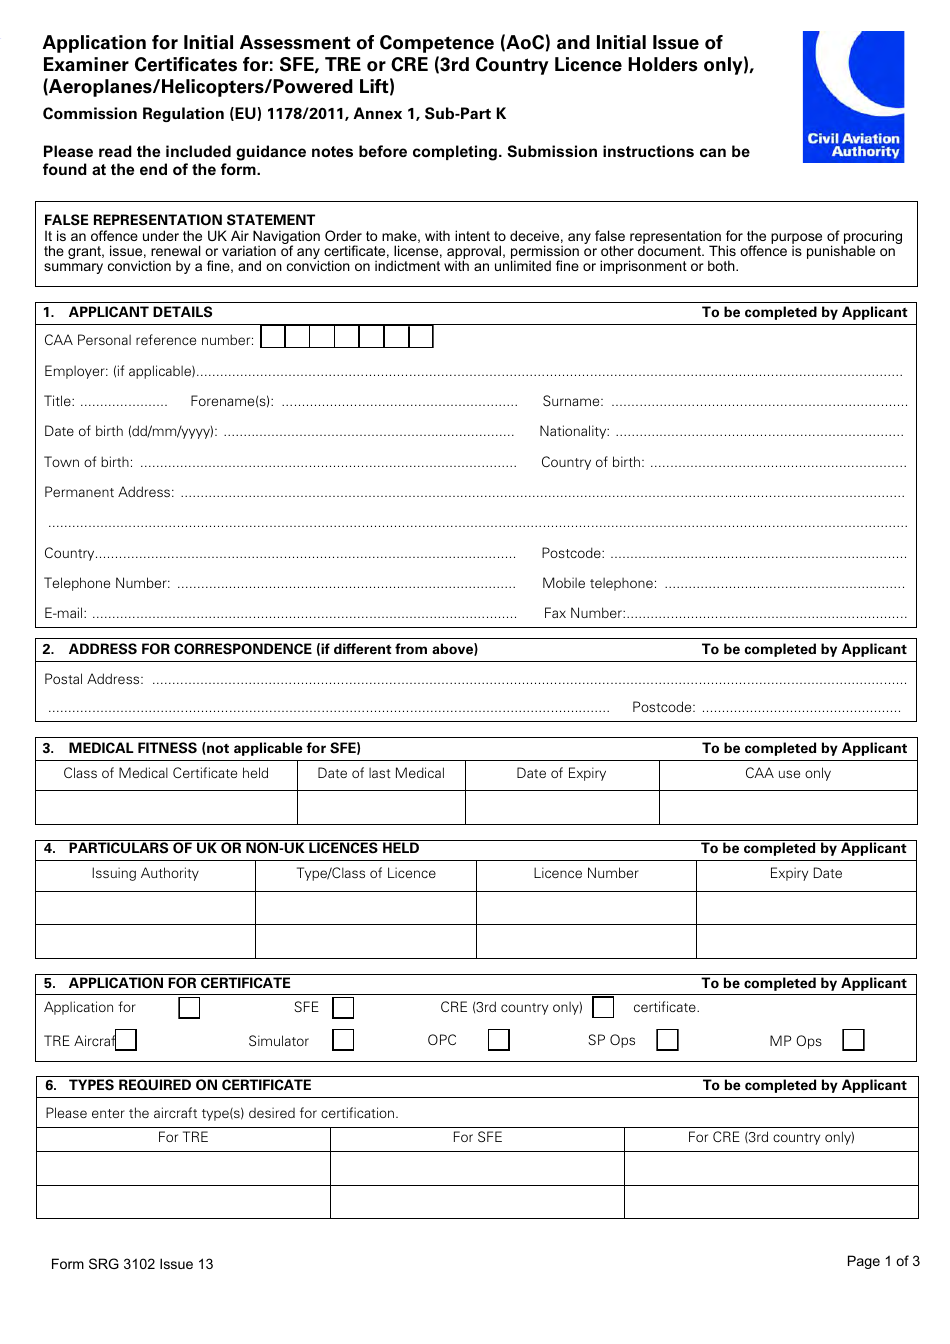 Form SRG3102 Application for Initial Assessment of Competence (Aoc) and Initial Issue of Examiner Certificates for: Sfe, Tre or Cre (3rd Country Licence Holders Only), (Aeroplanes / Helicopters / Powered Lift) - United Kingdom, Page 1